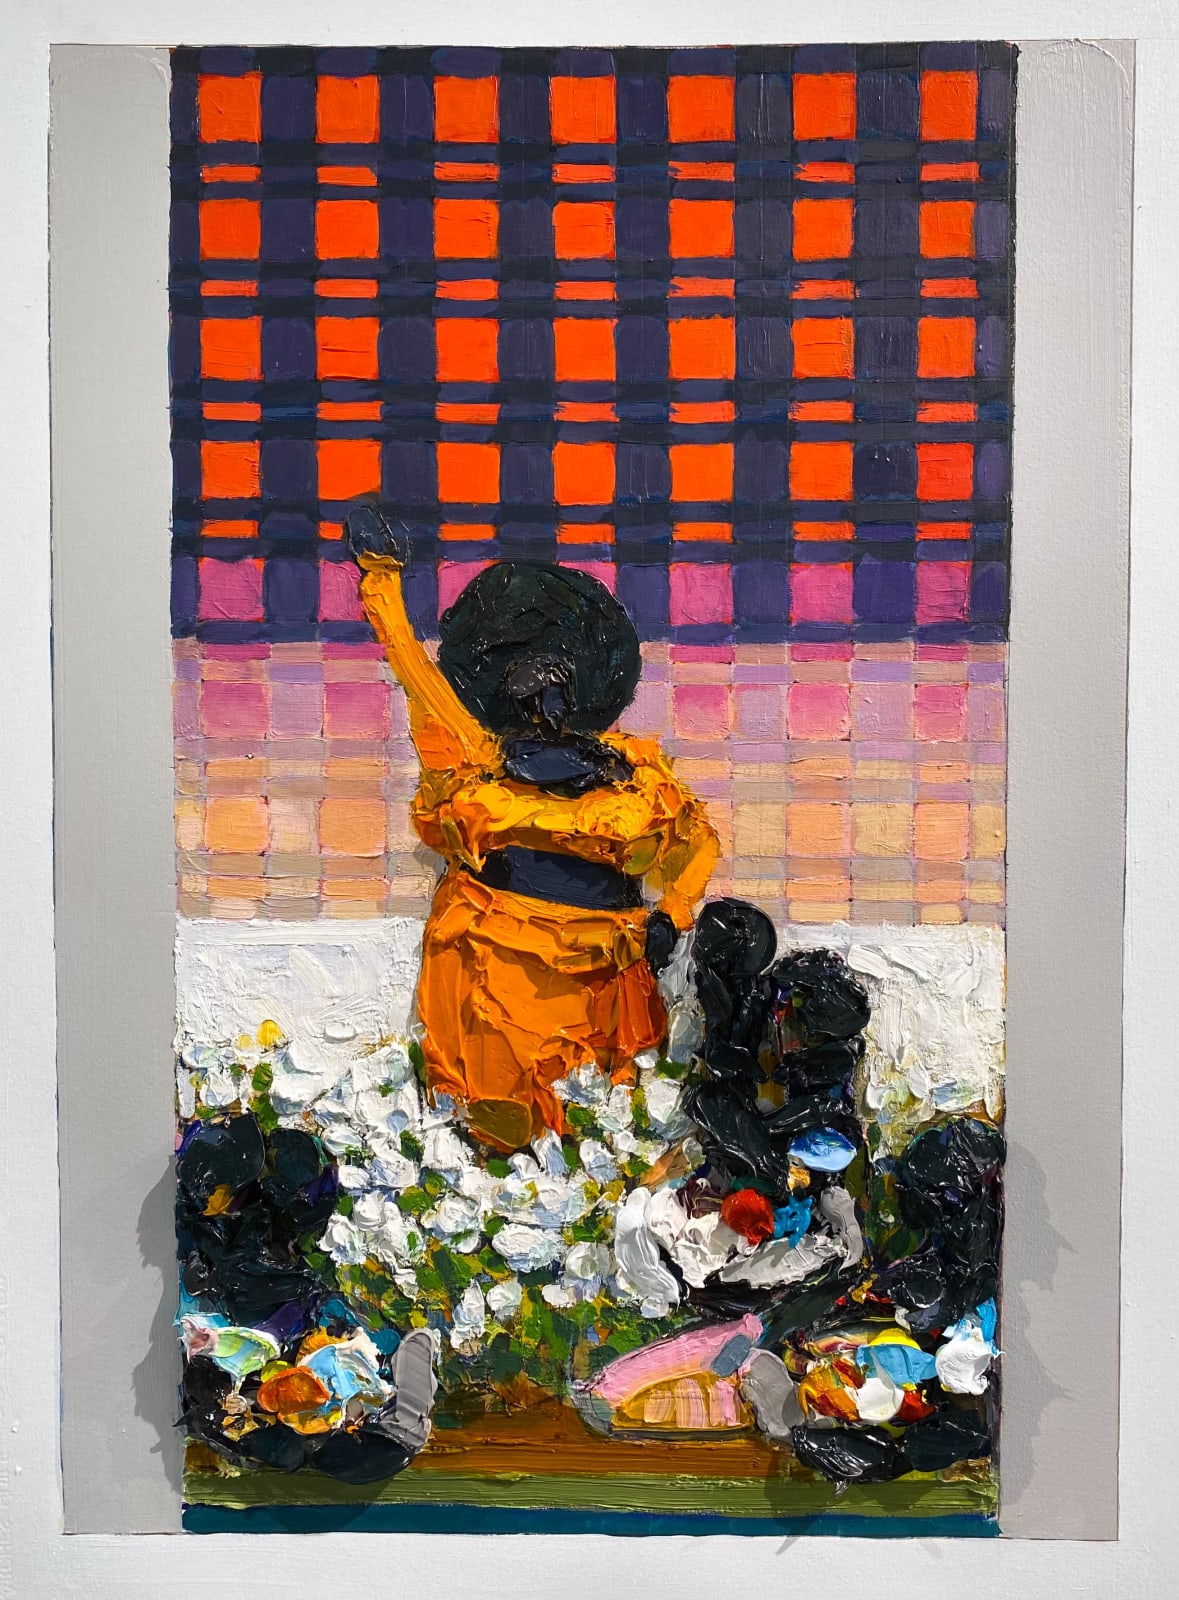 Lavaughan Jenkins, Hold us together (cotton field), 2021